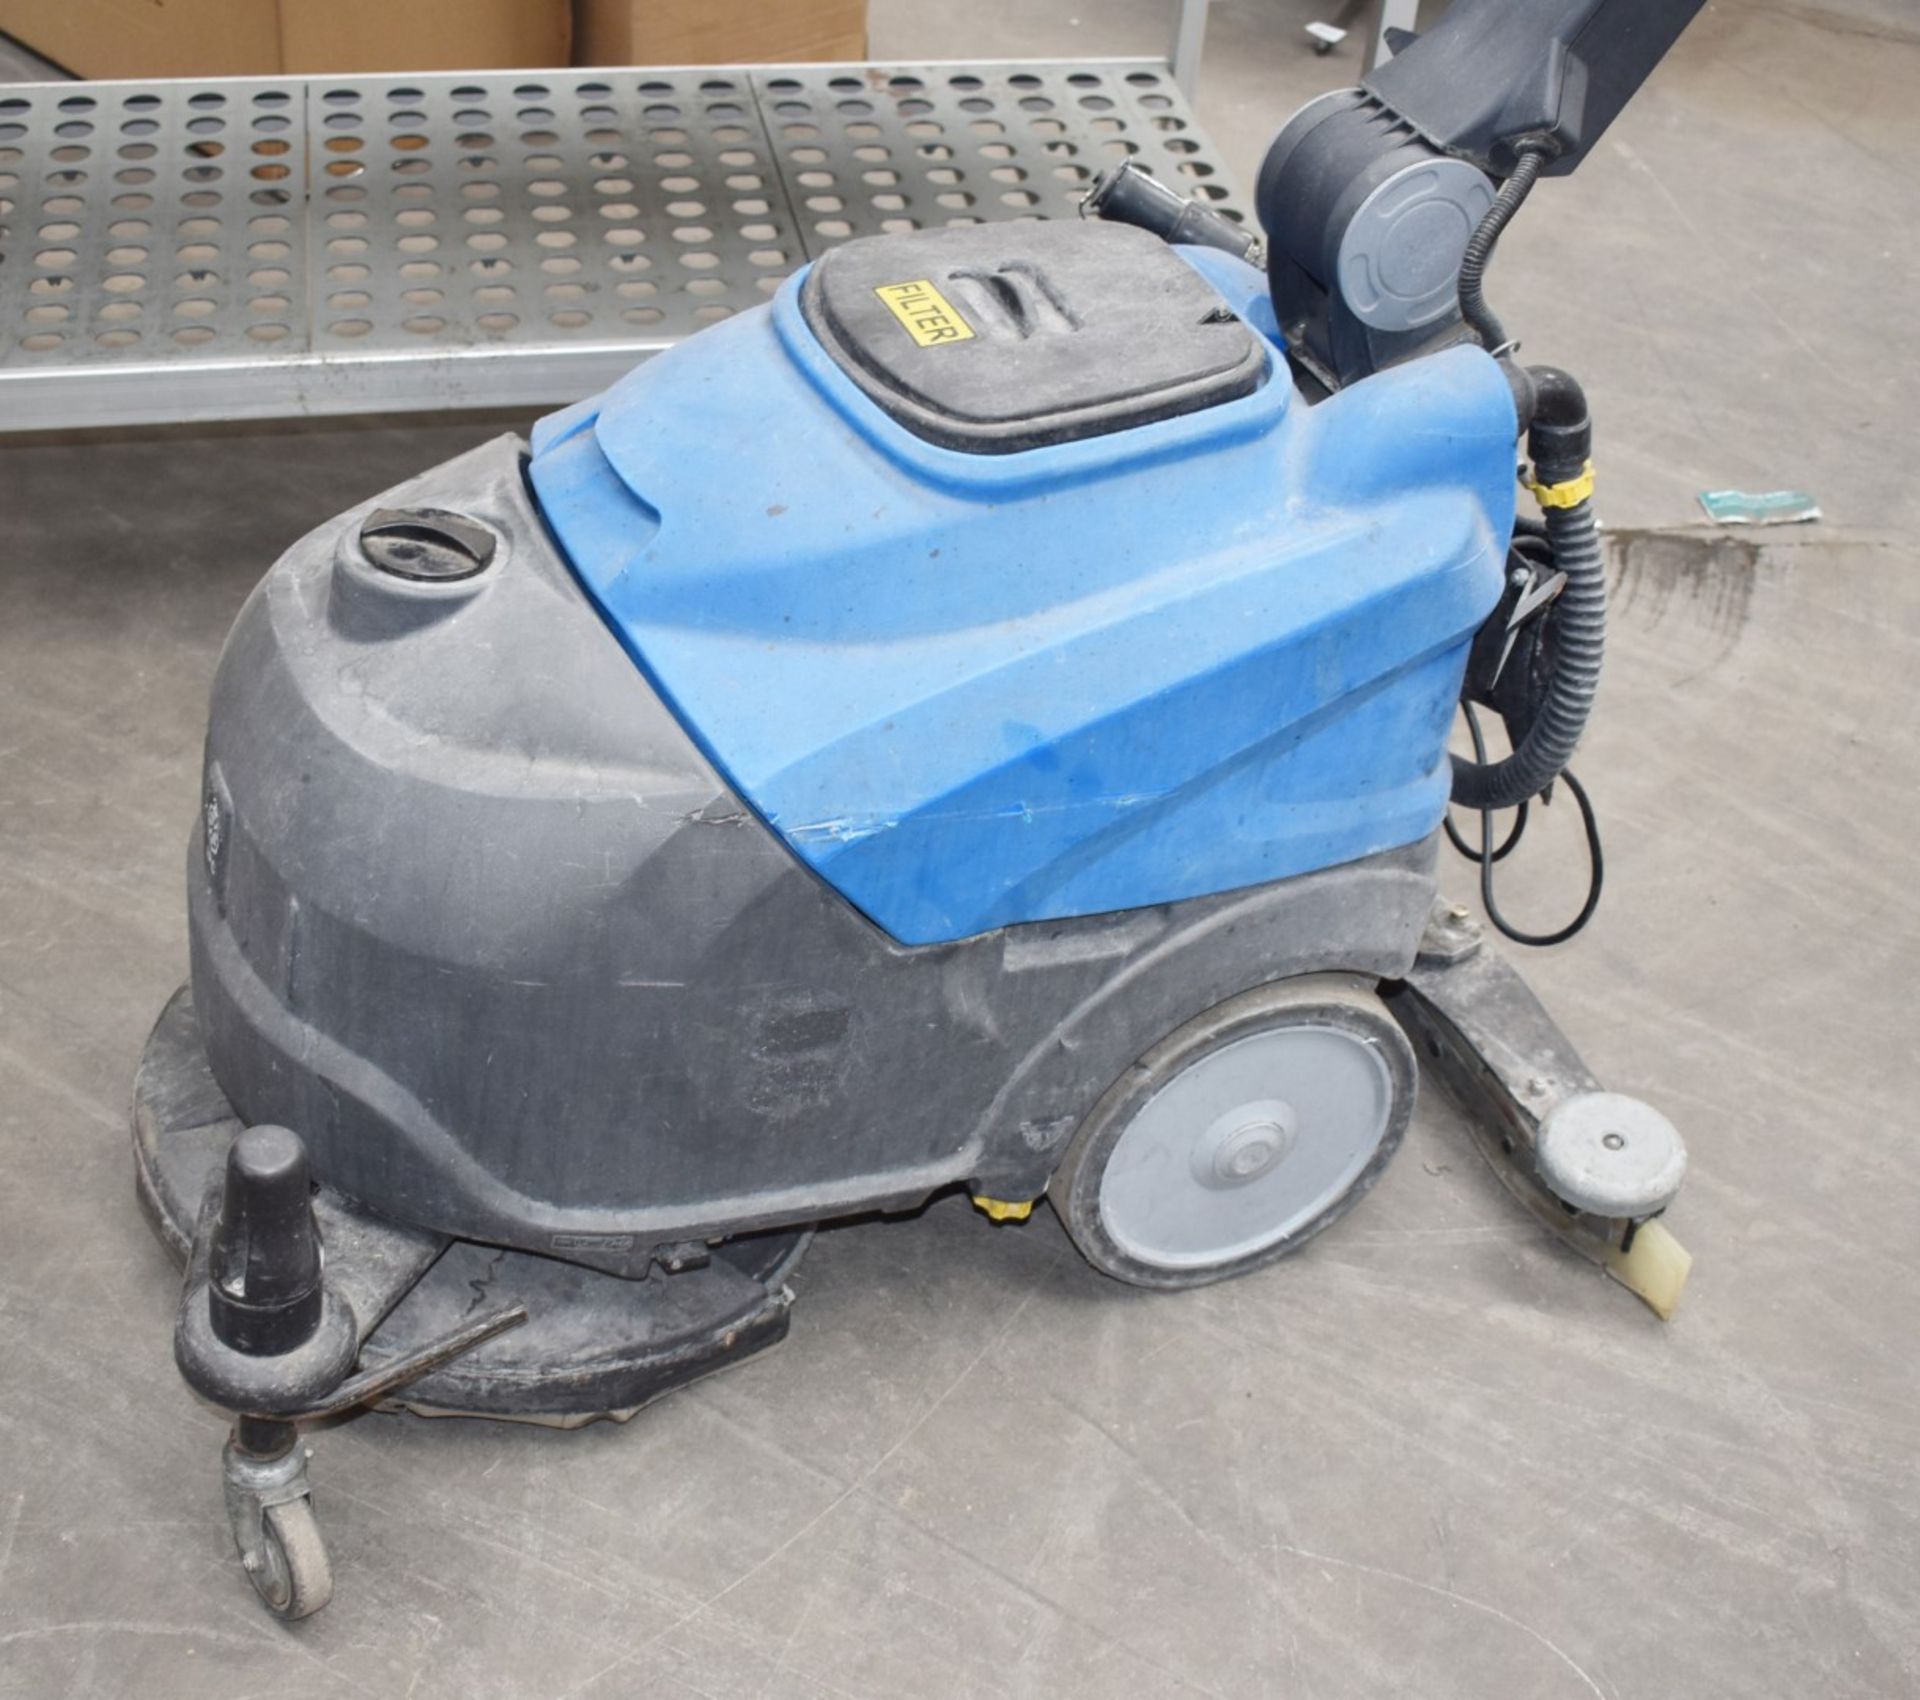 1 x ITC CT30 Walk Behind Battery Powered Floor Cleaner Scrubber/Dryer - Recently Removed From - Image 3 of 12